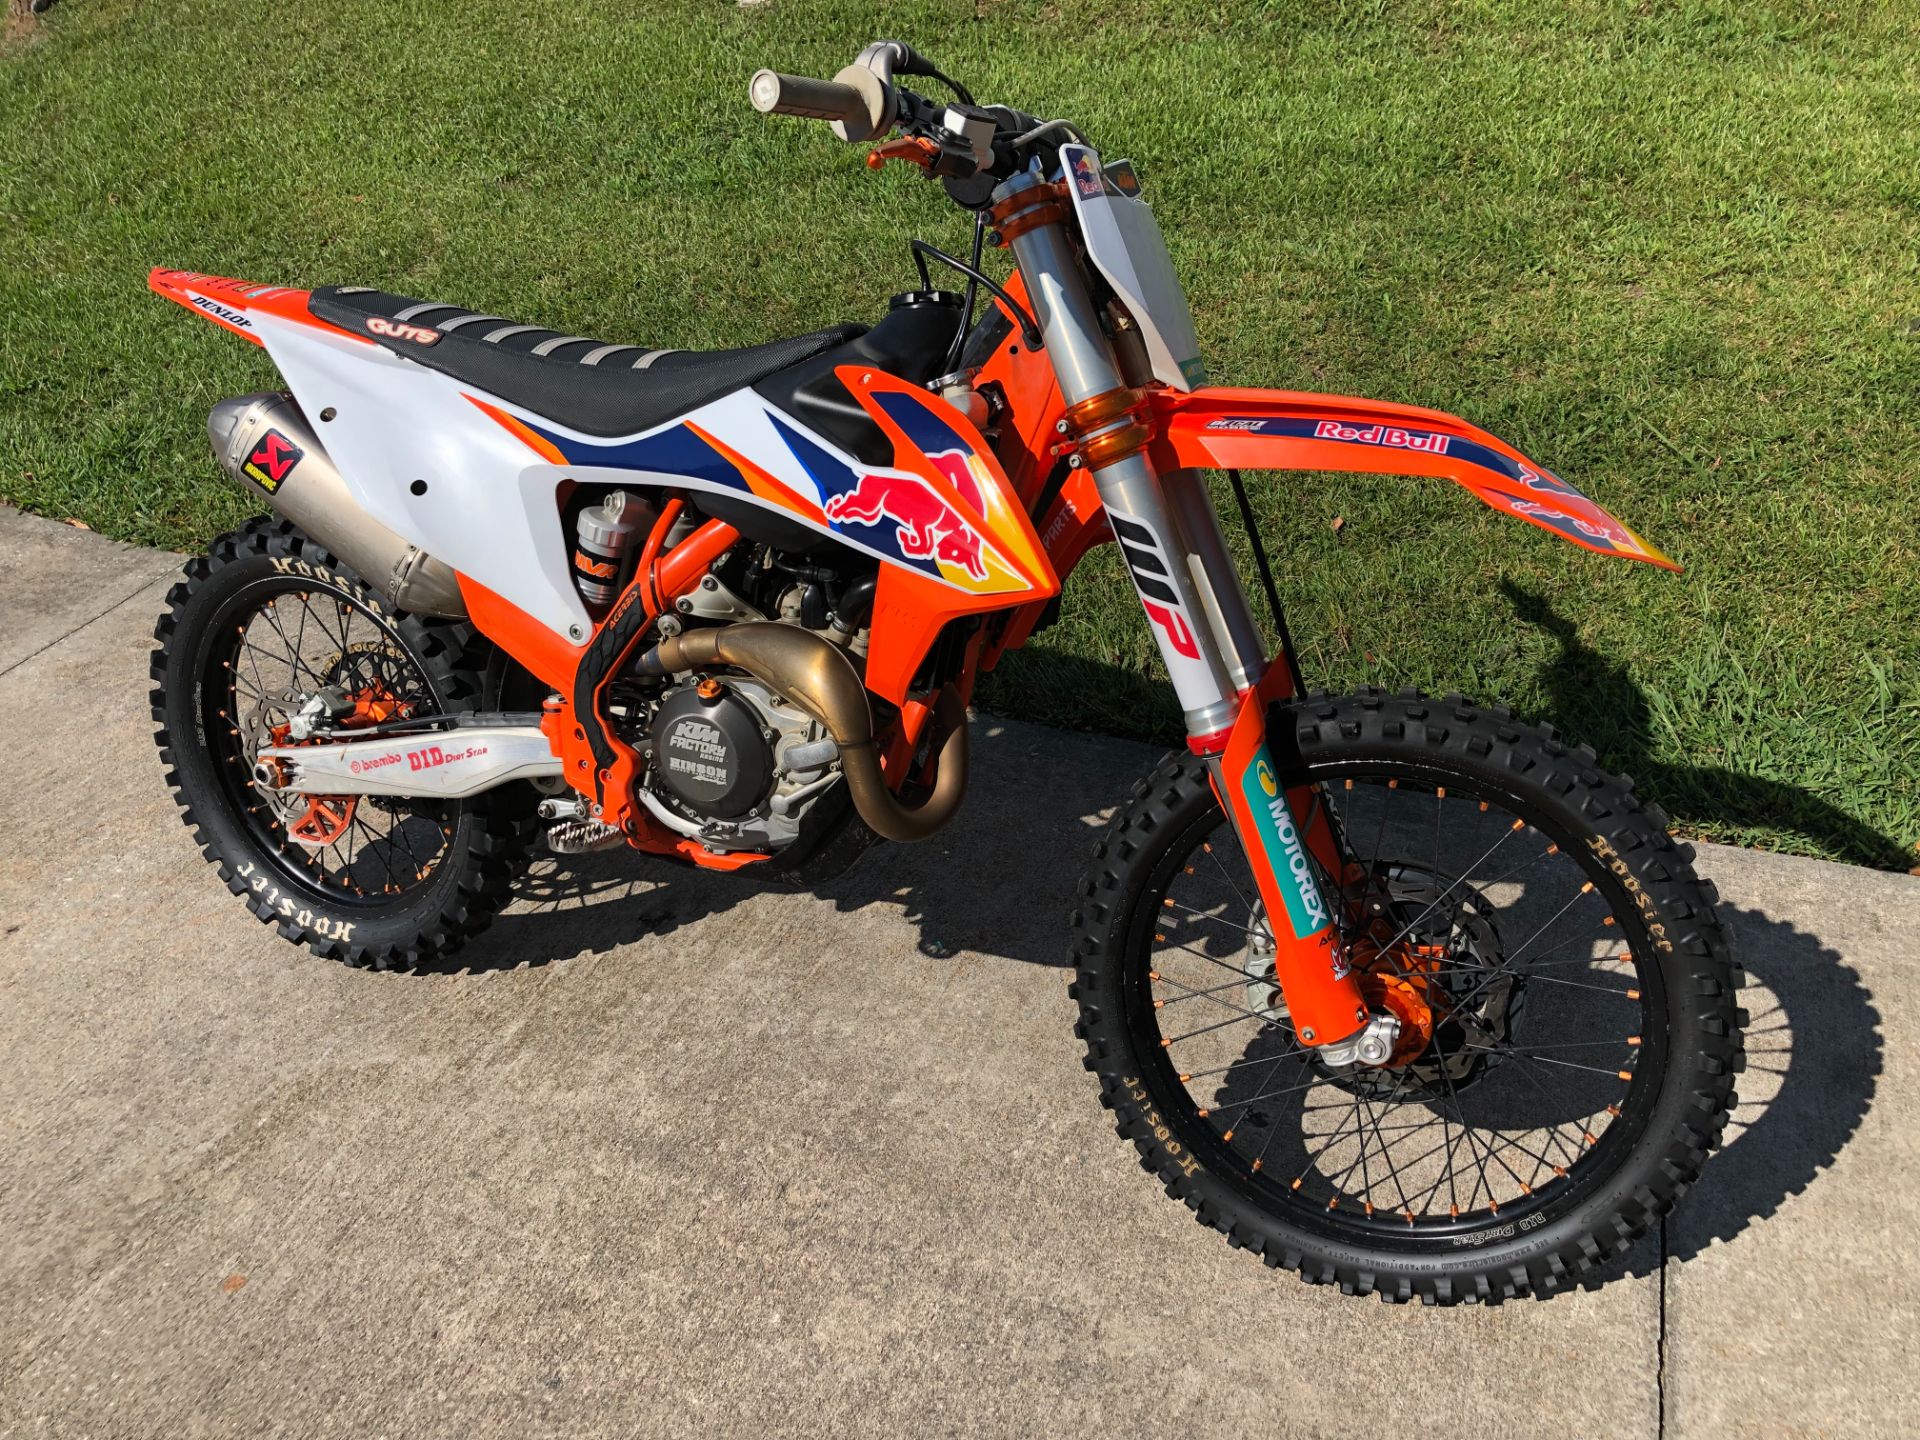 2020 KTM 450 SX-F Factory Edition in Fayetteville, Georgia - Photo 3